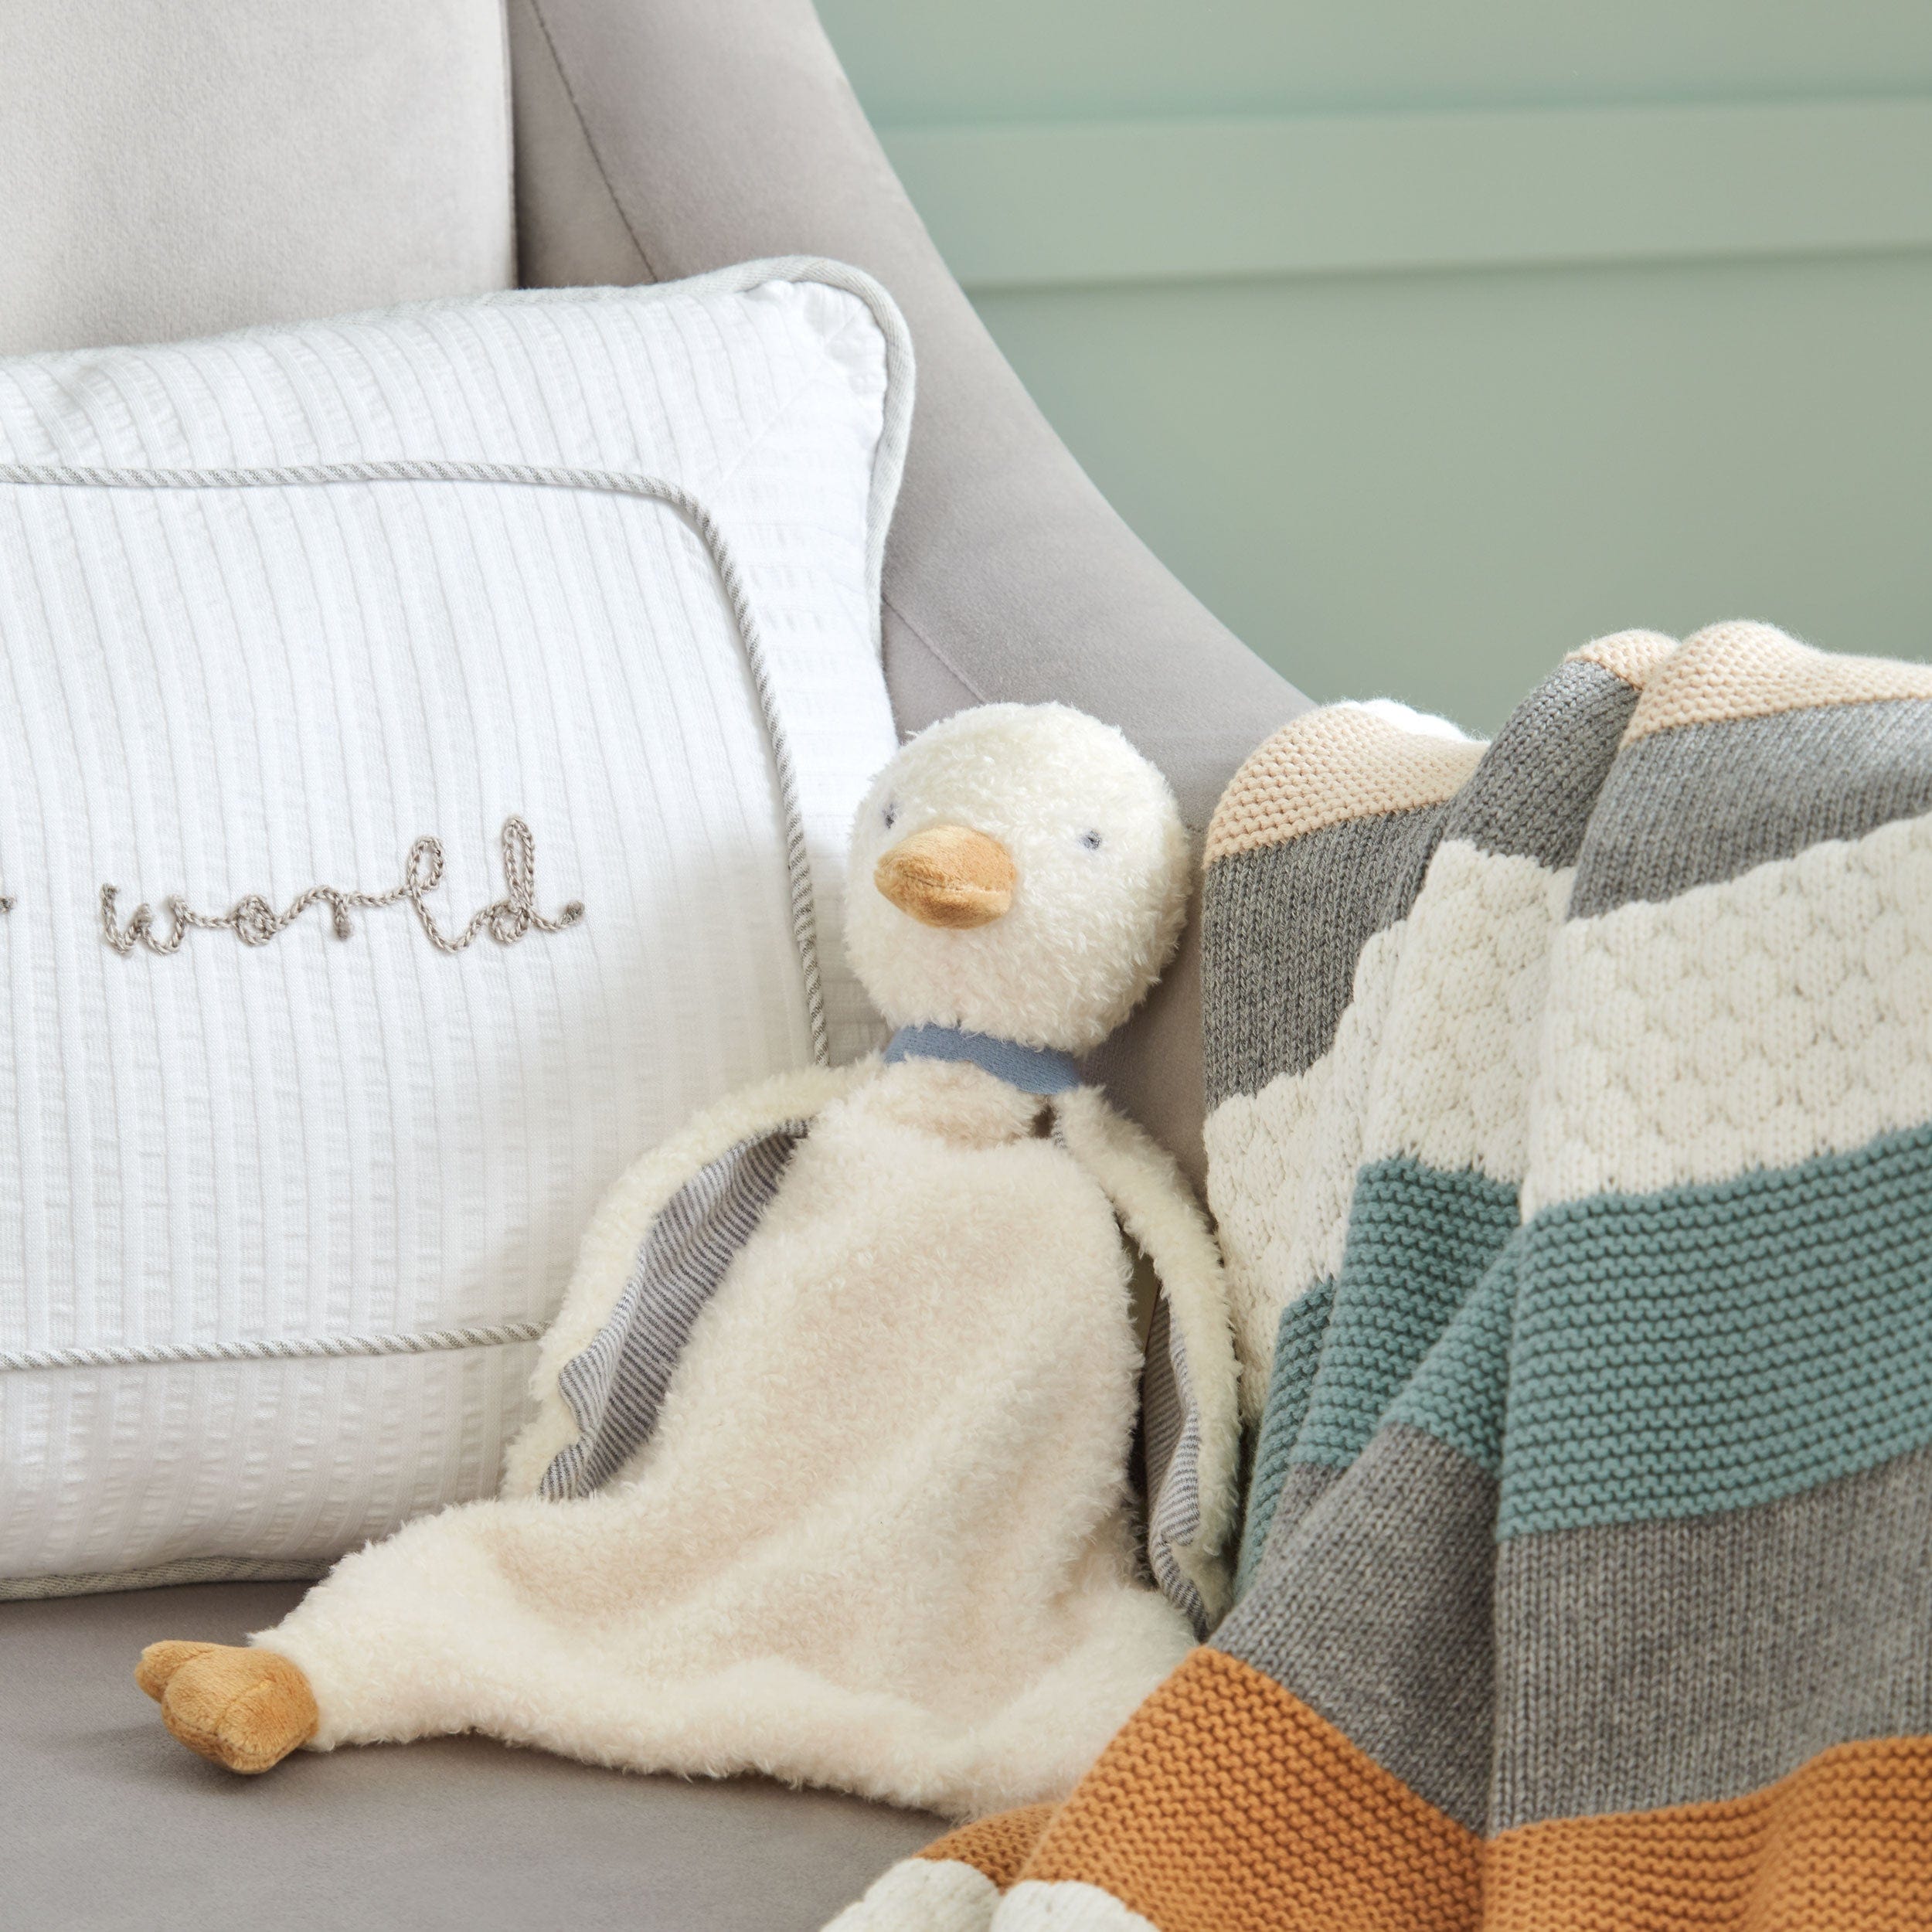 Mamas & Papas Welcome to the World Comforter - Duck Soft Animals 7580V0802